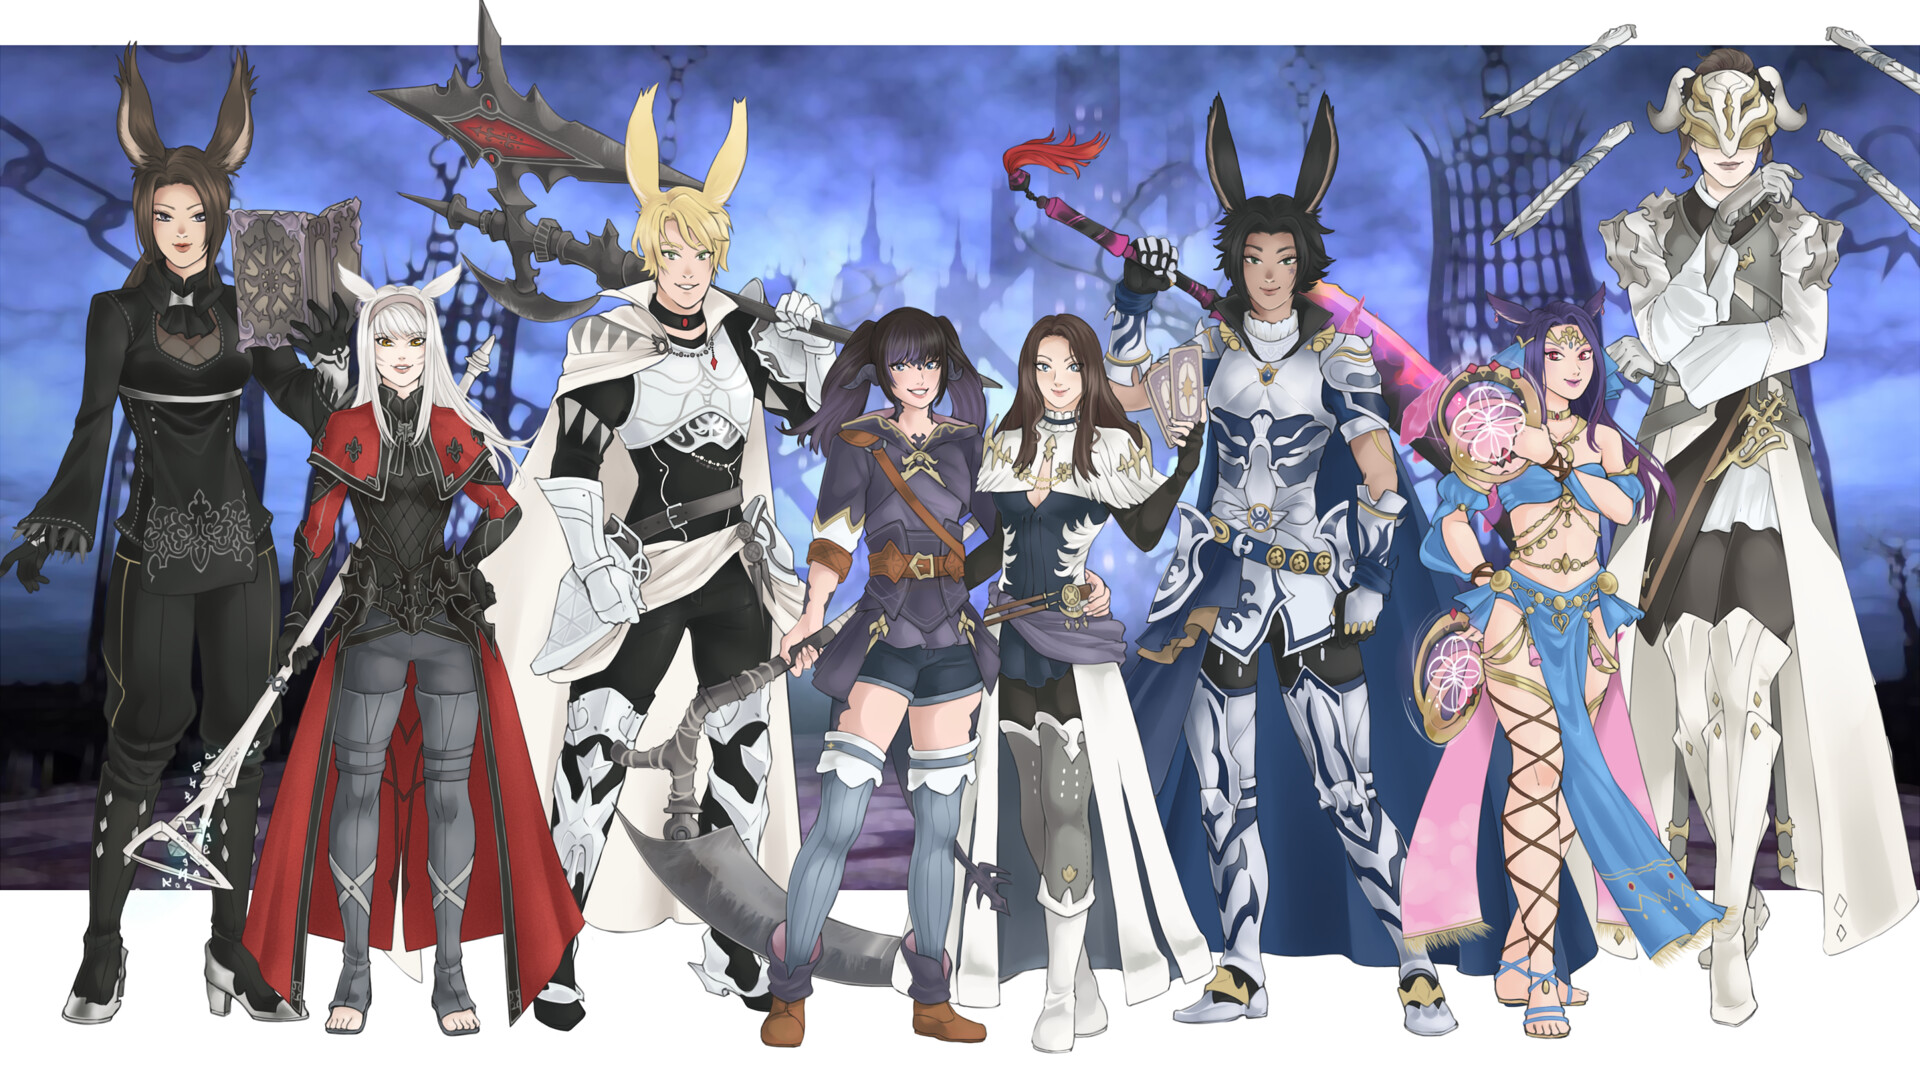 FINAL FANTASY XIV on X: The #FFXIV Spring Discount Campaign has